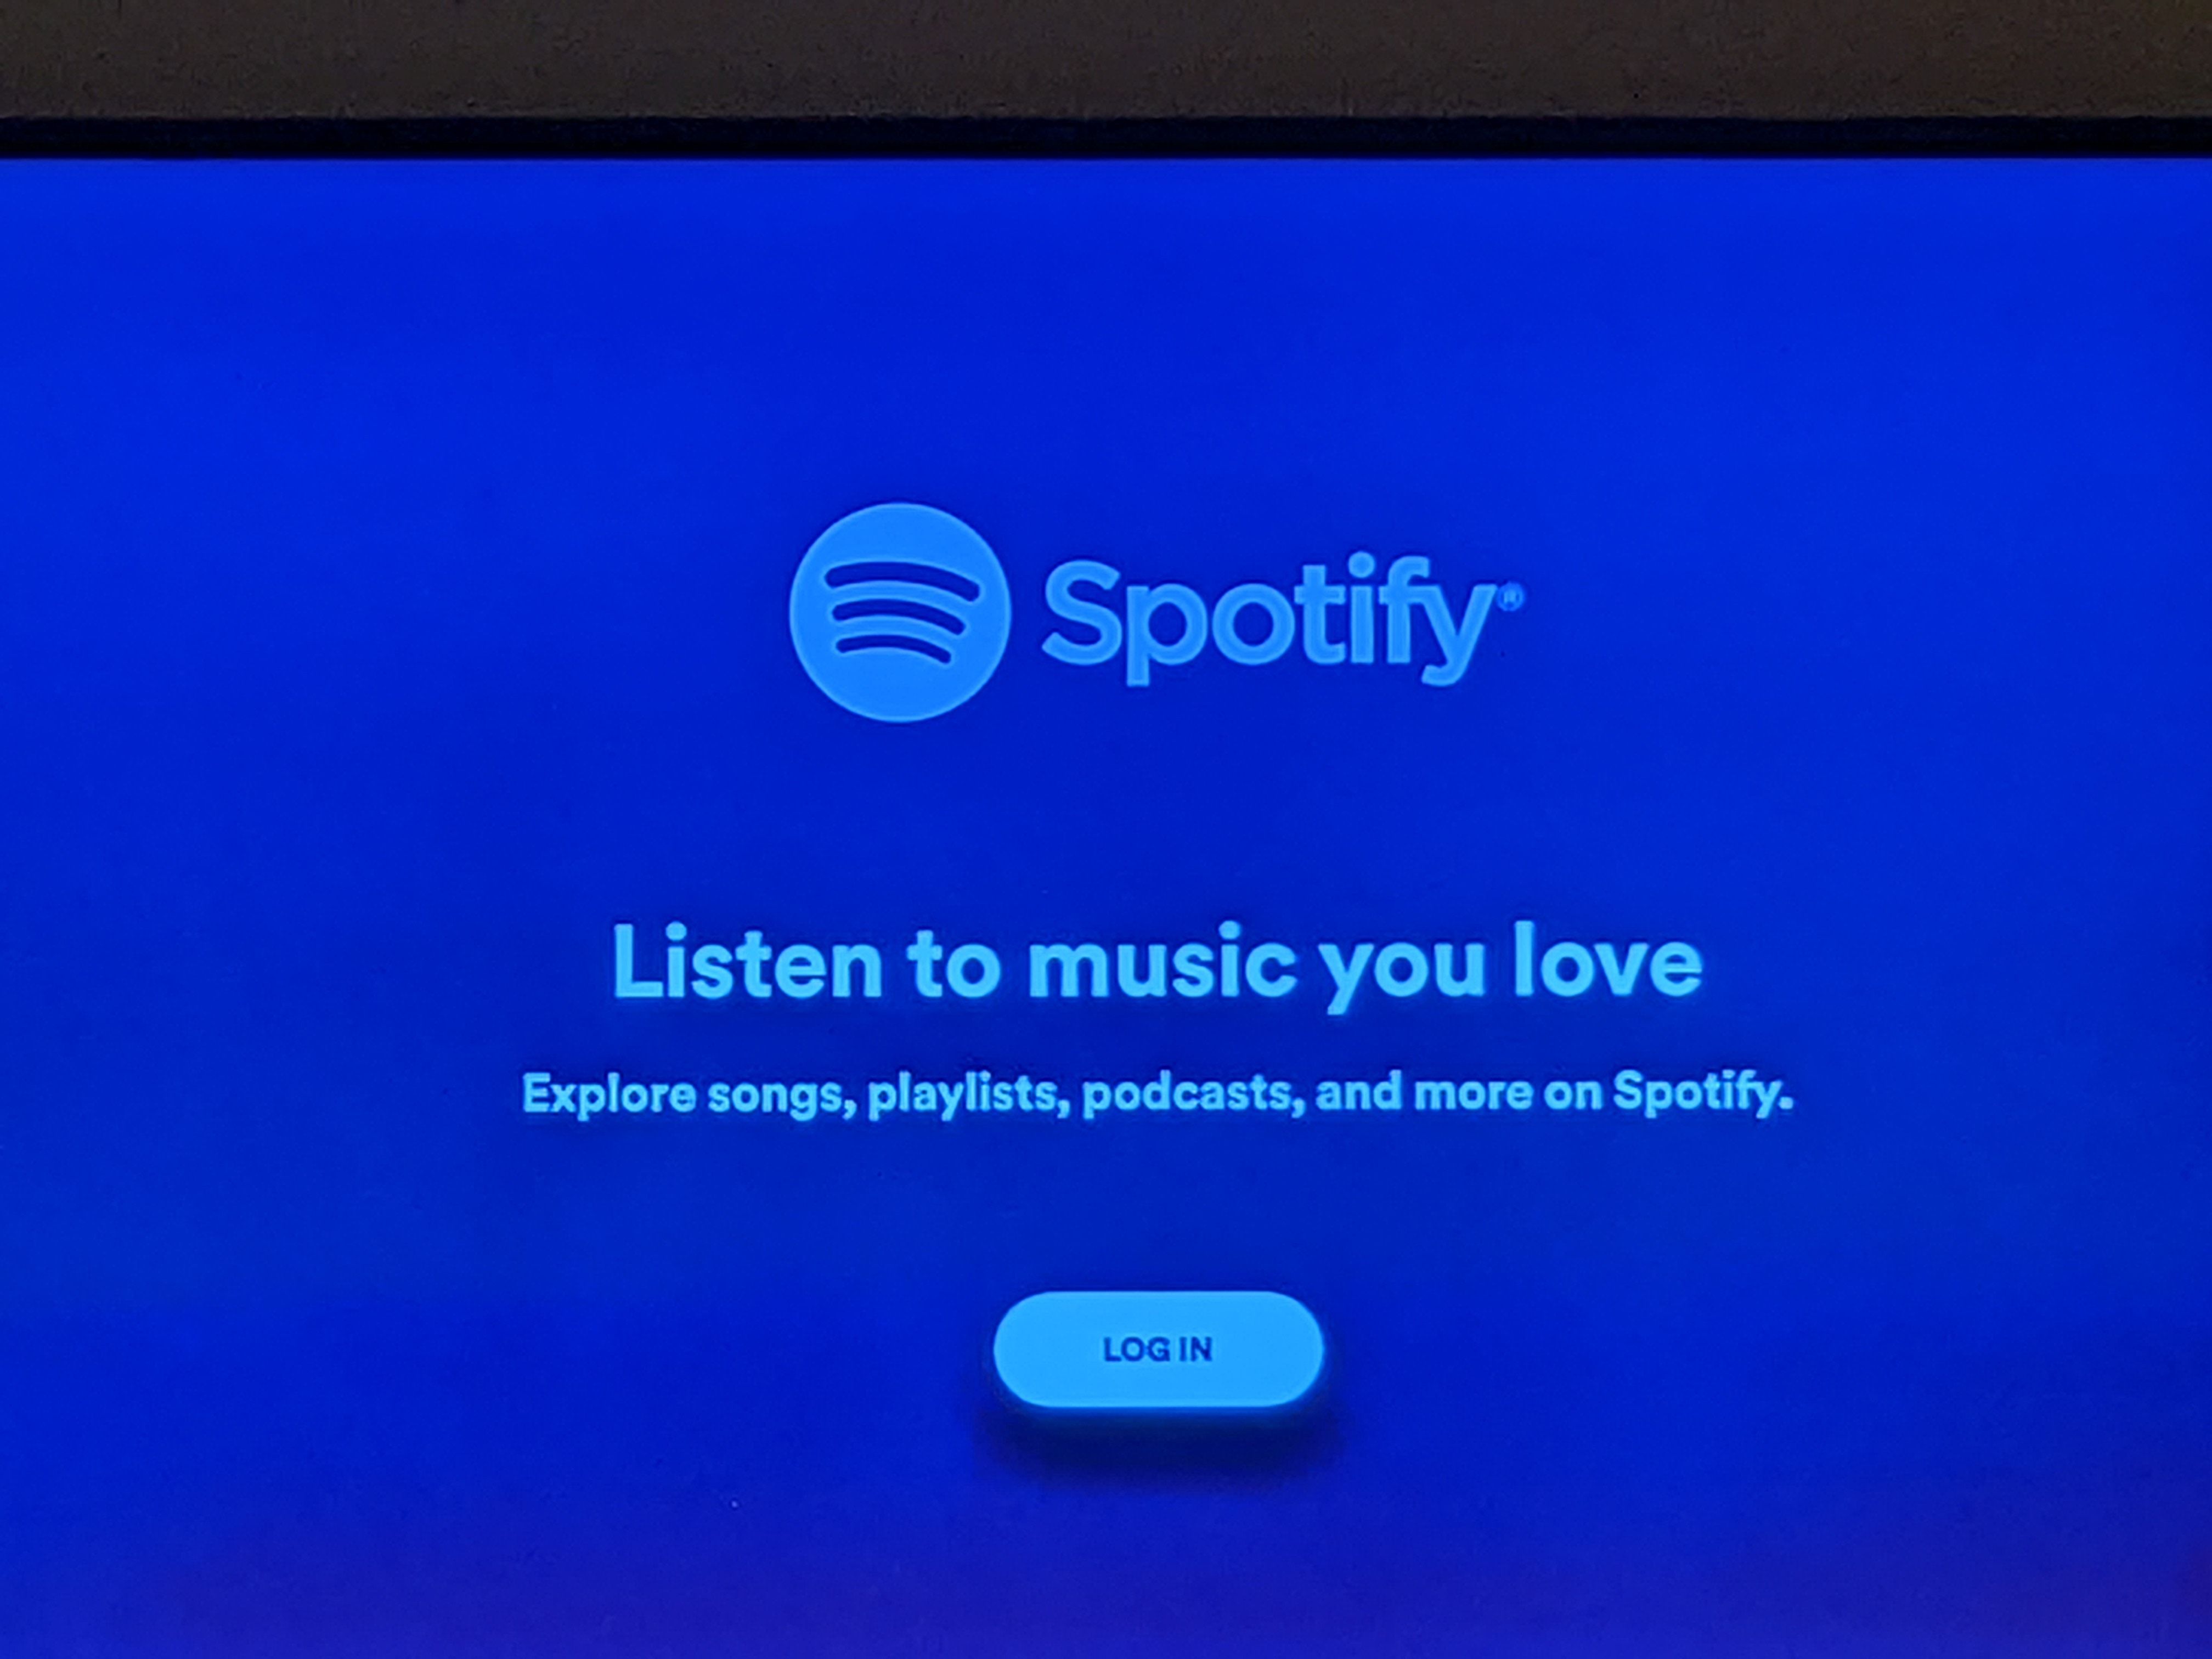 Apple TV - I have to log in every time I use the S... - The Spotify  Community